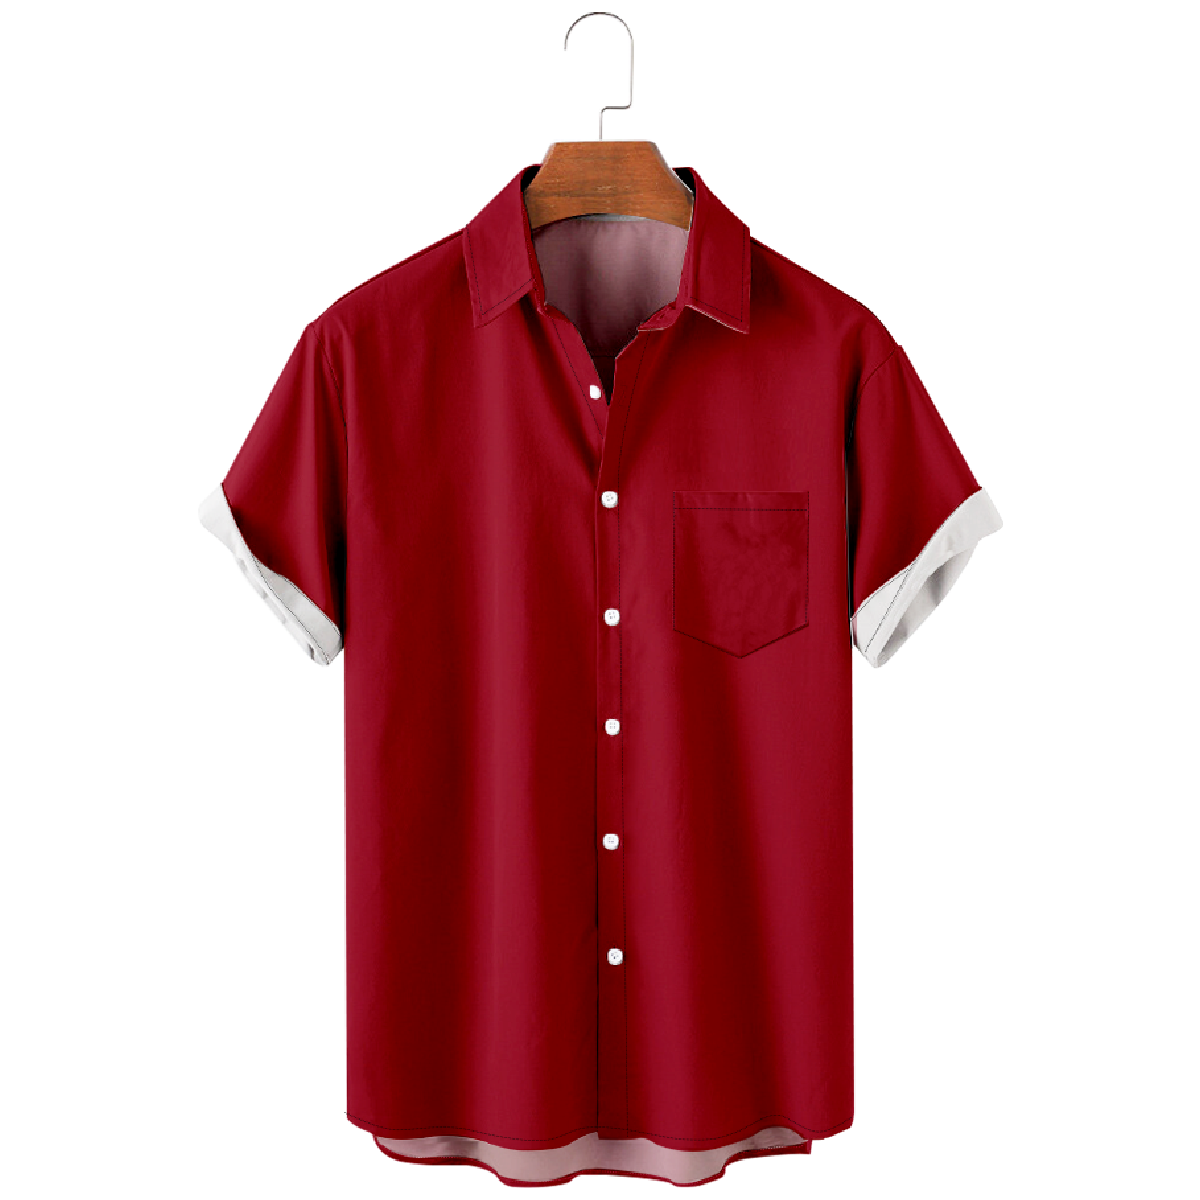 Houston Battle Red Button Up Shirt for Men Shirt with Front Pocket Short Sleeve